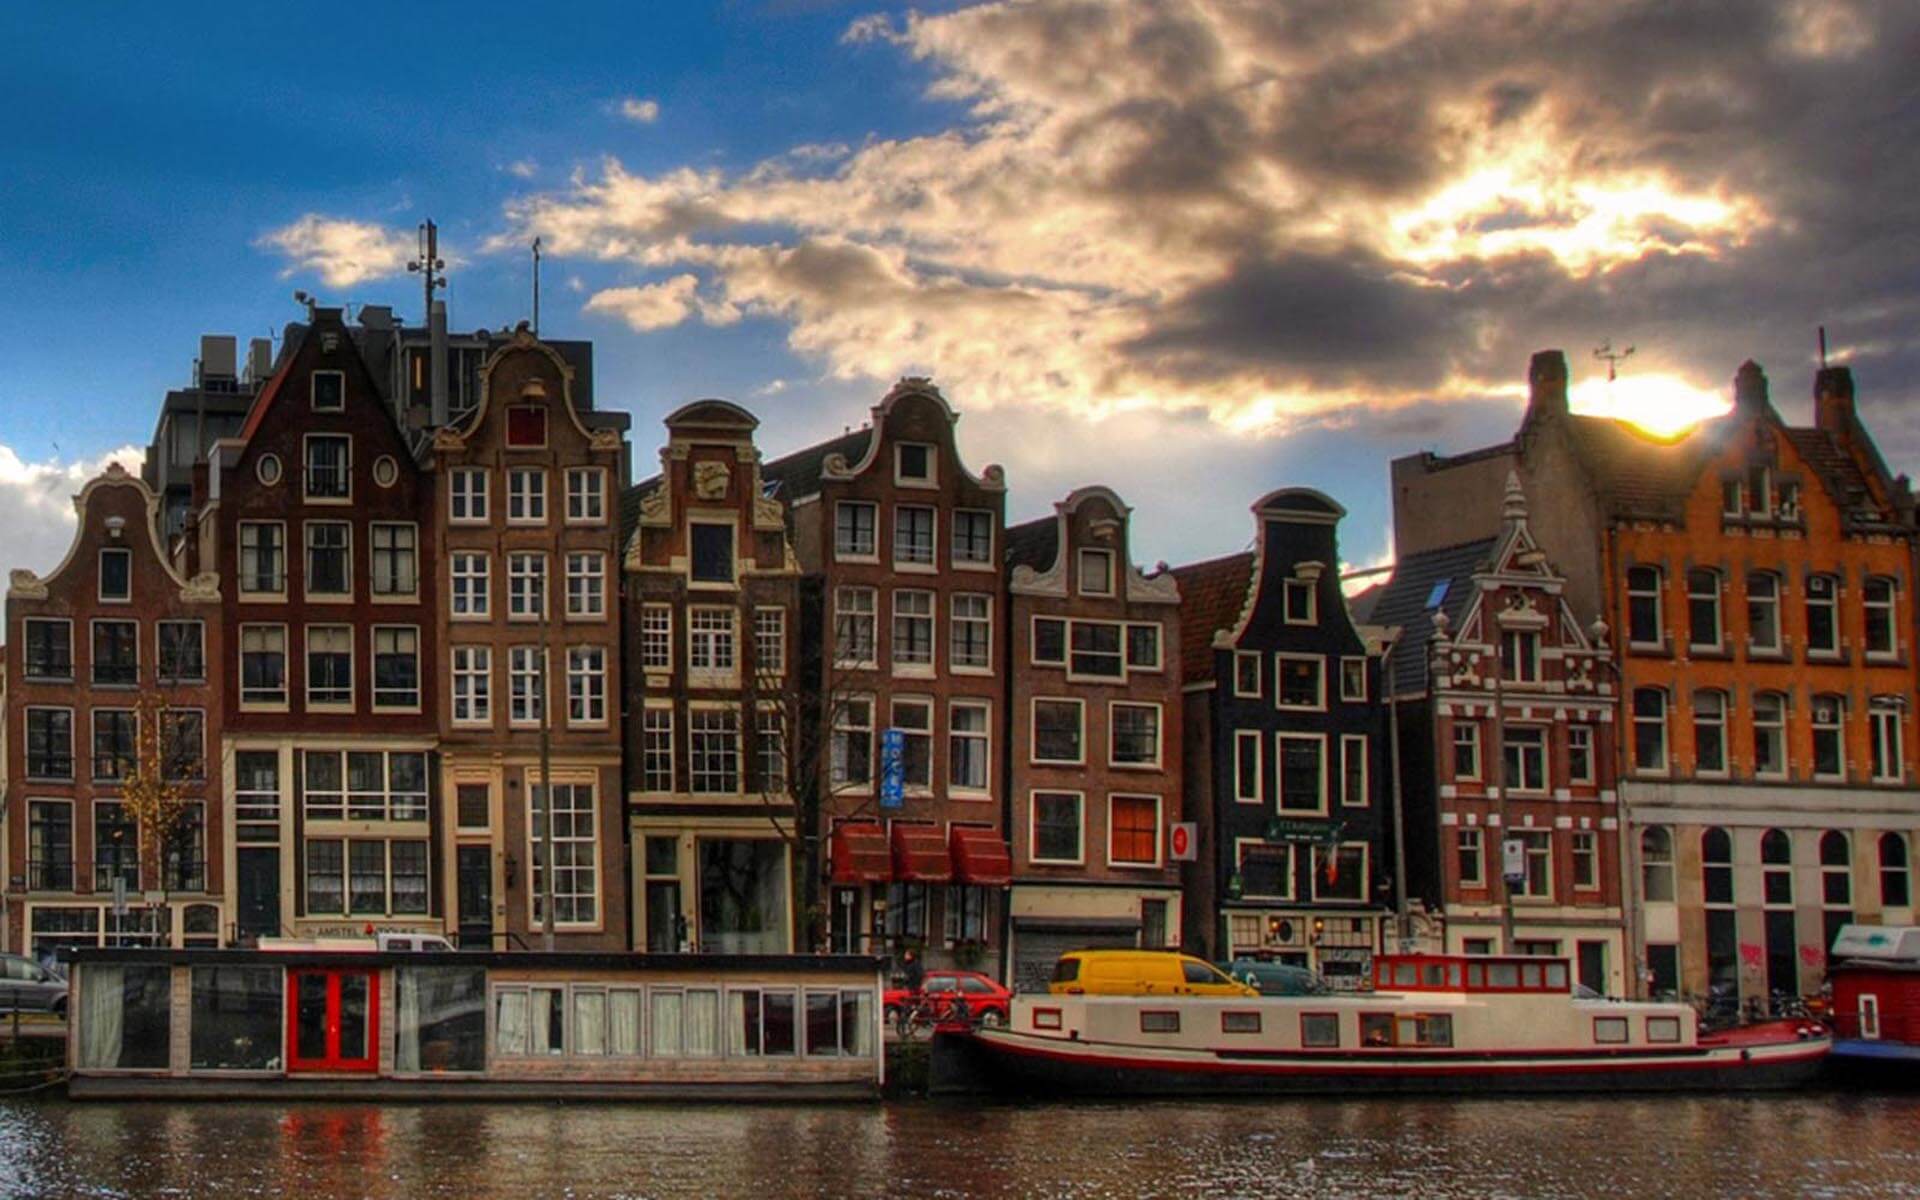 Cheap flights from Larnaca to Amsterdam